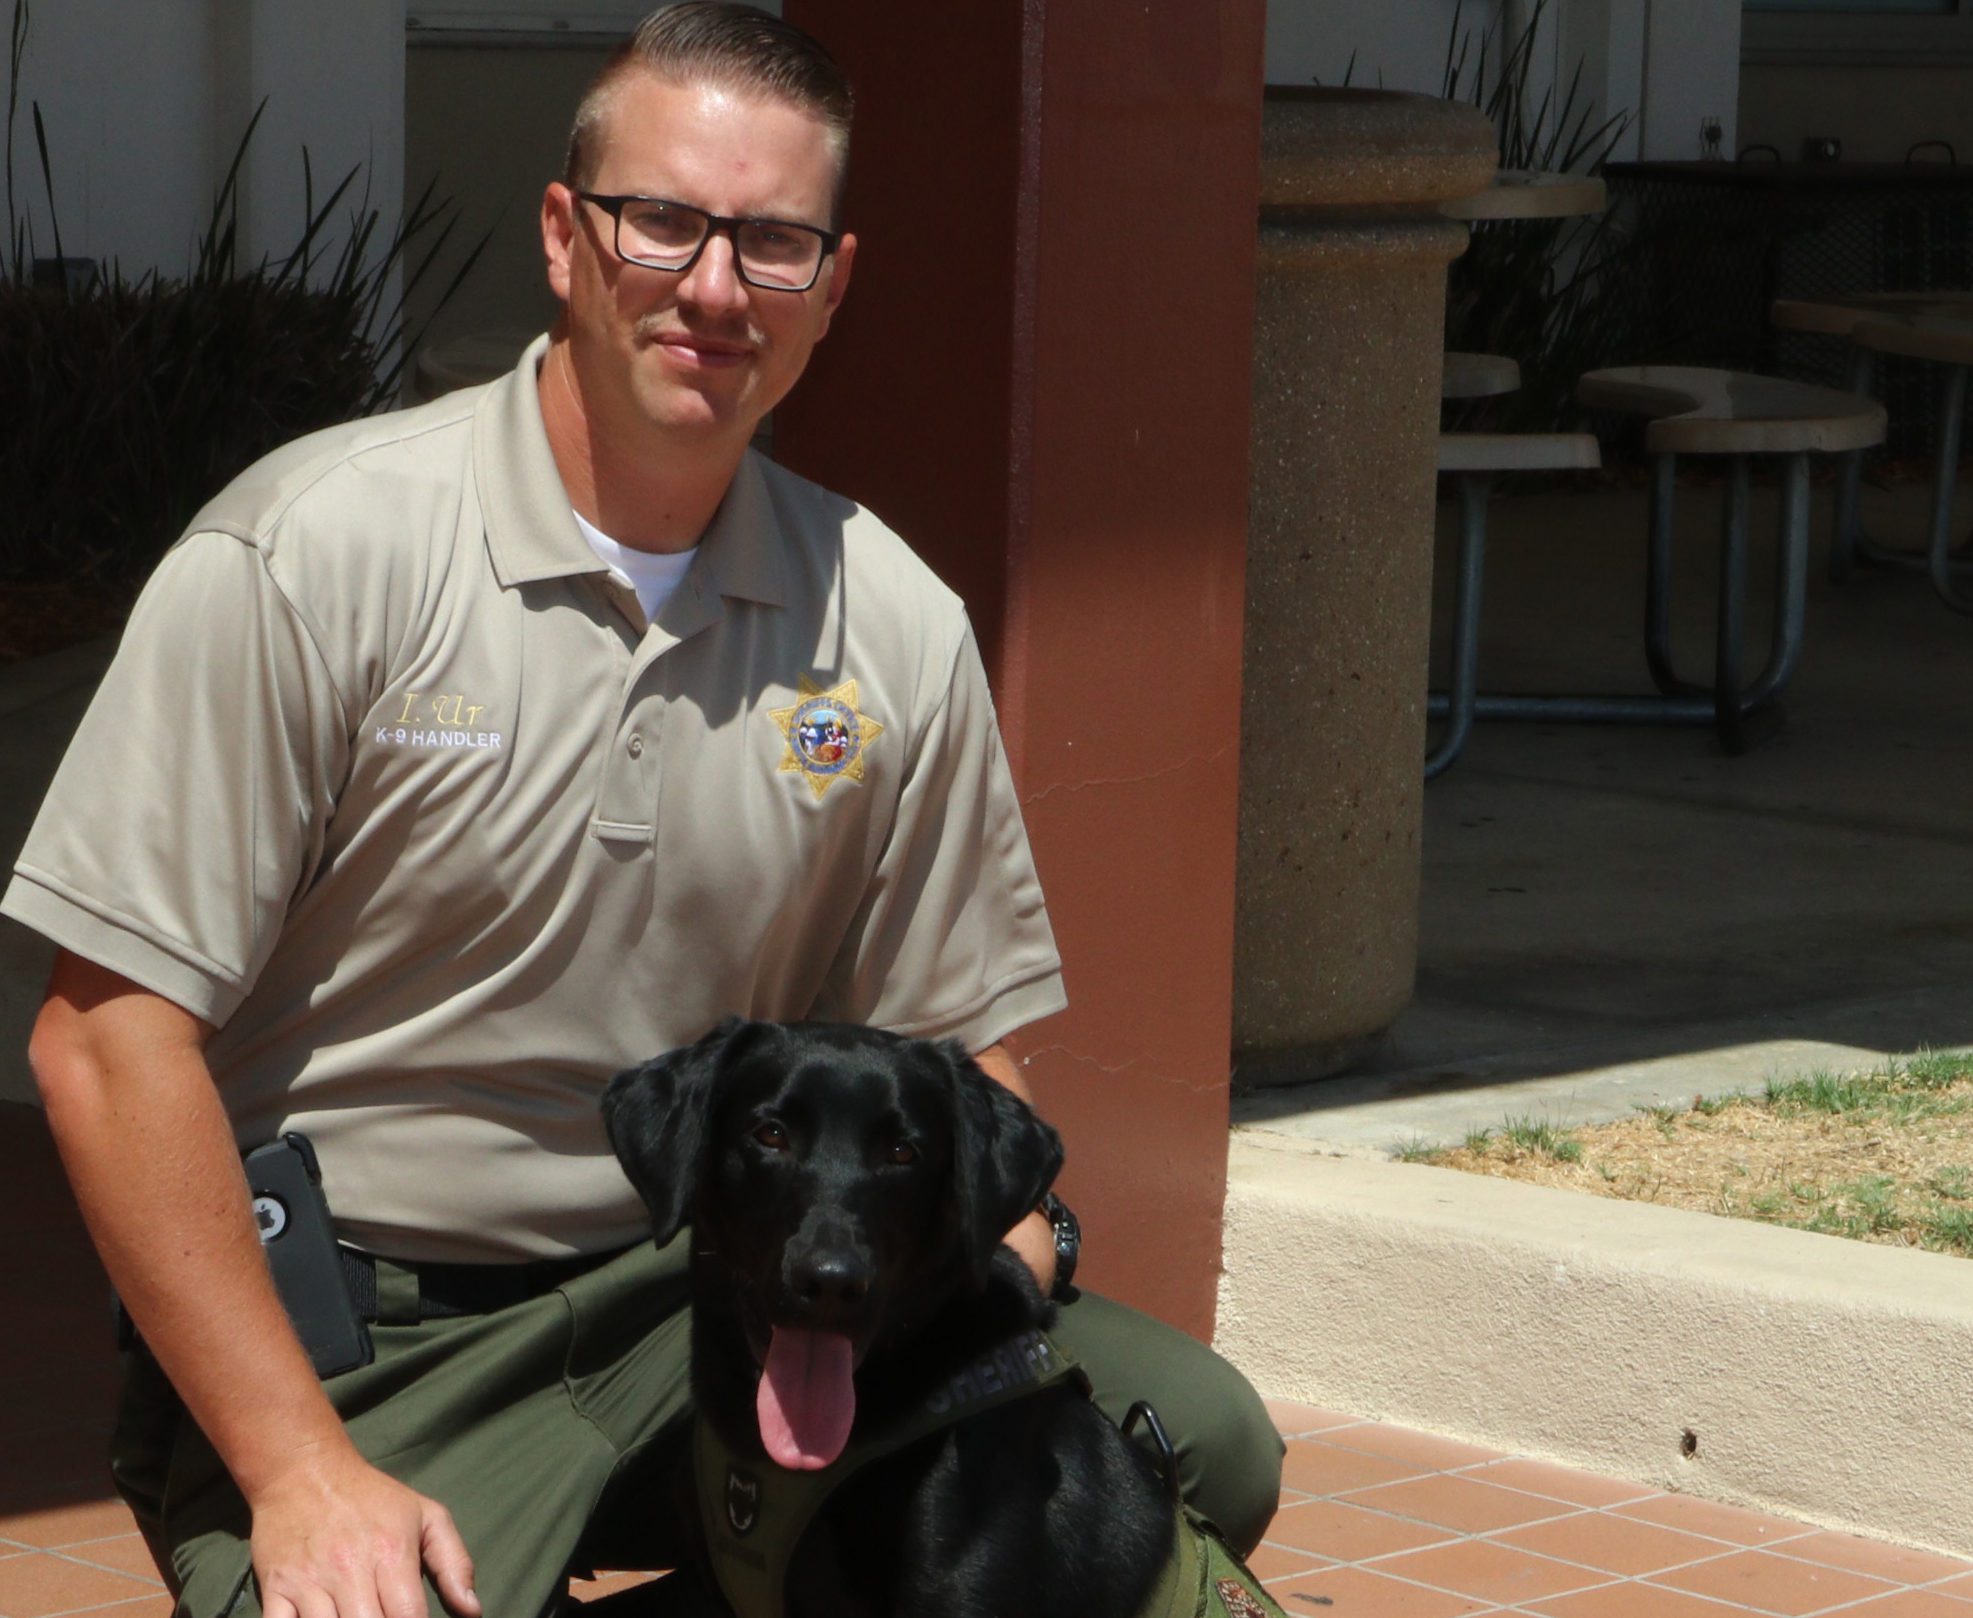 New K-9 team to search jail for drugs